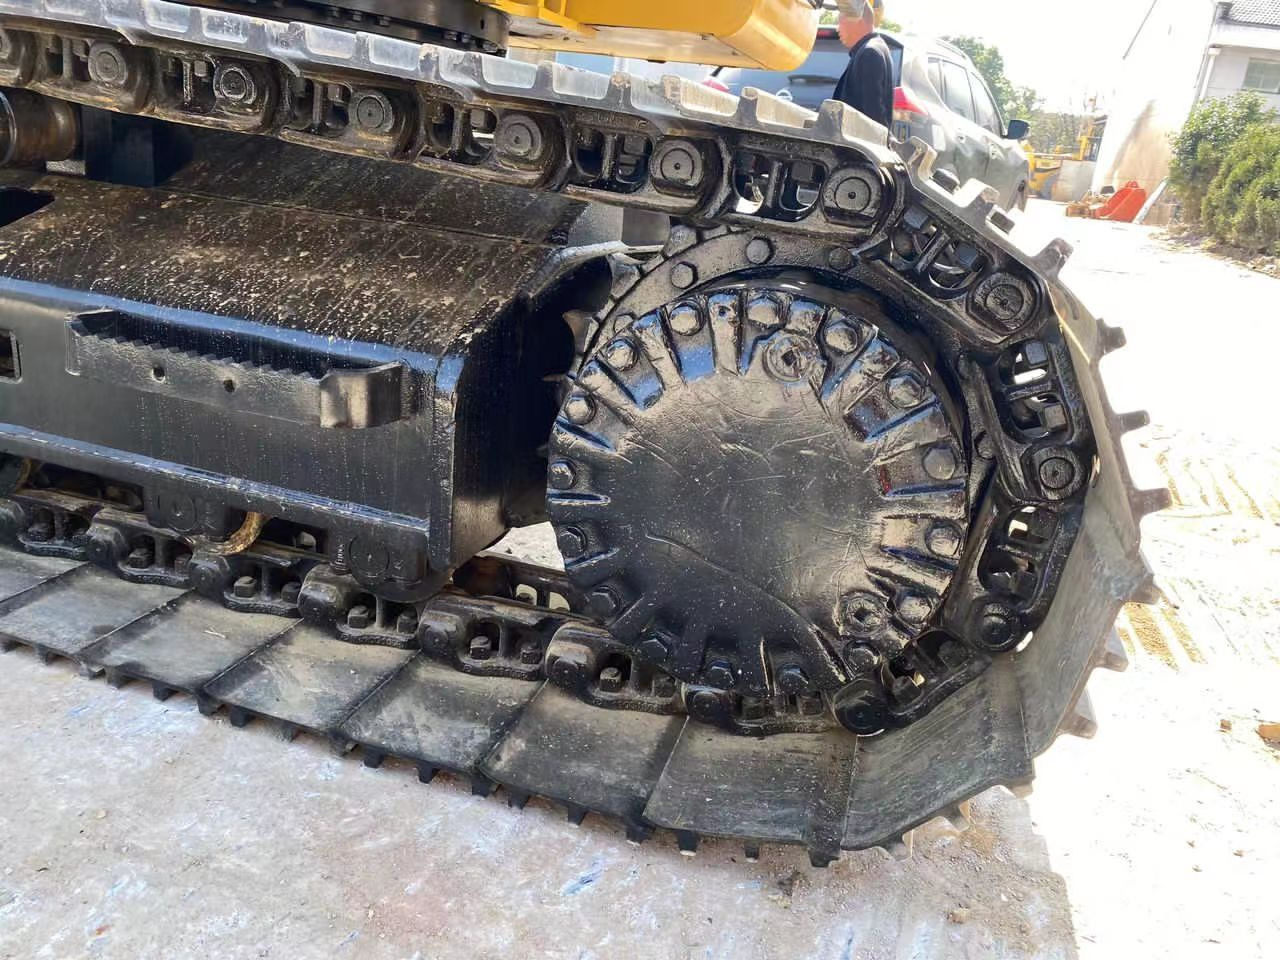 Lintekskavaator used excavator CATERPILLAR 320D2 original design and perfect service welcome to inquire: pilt 8